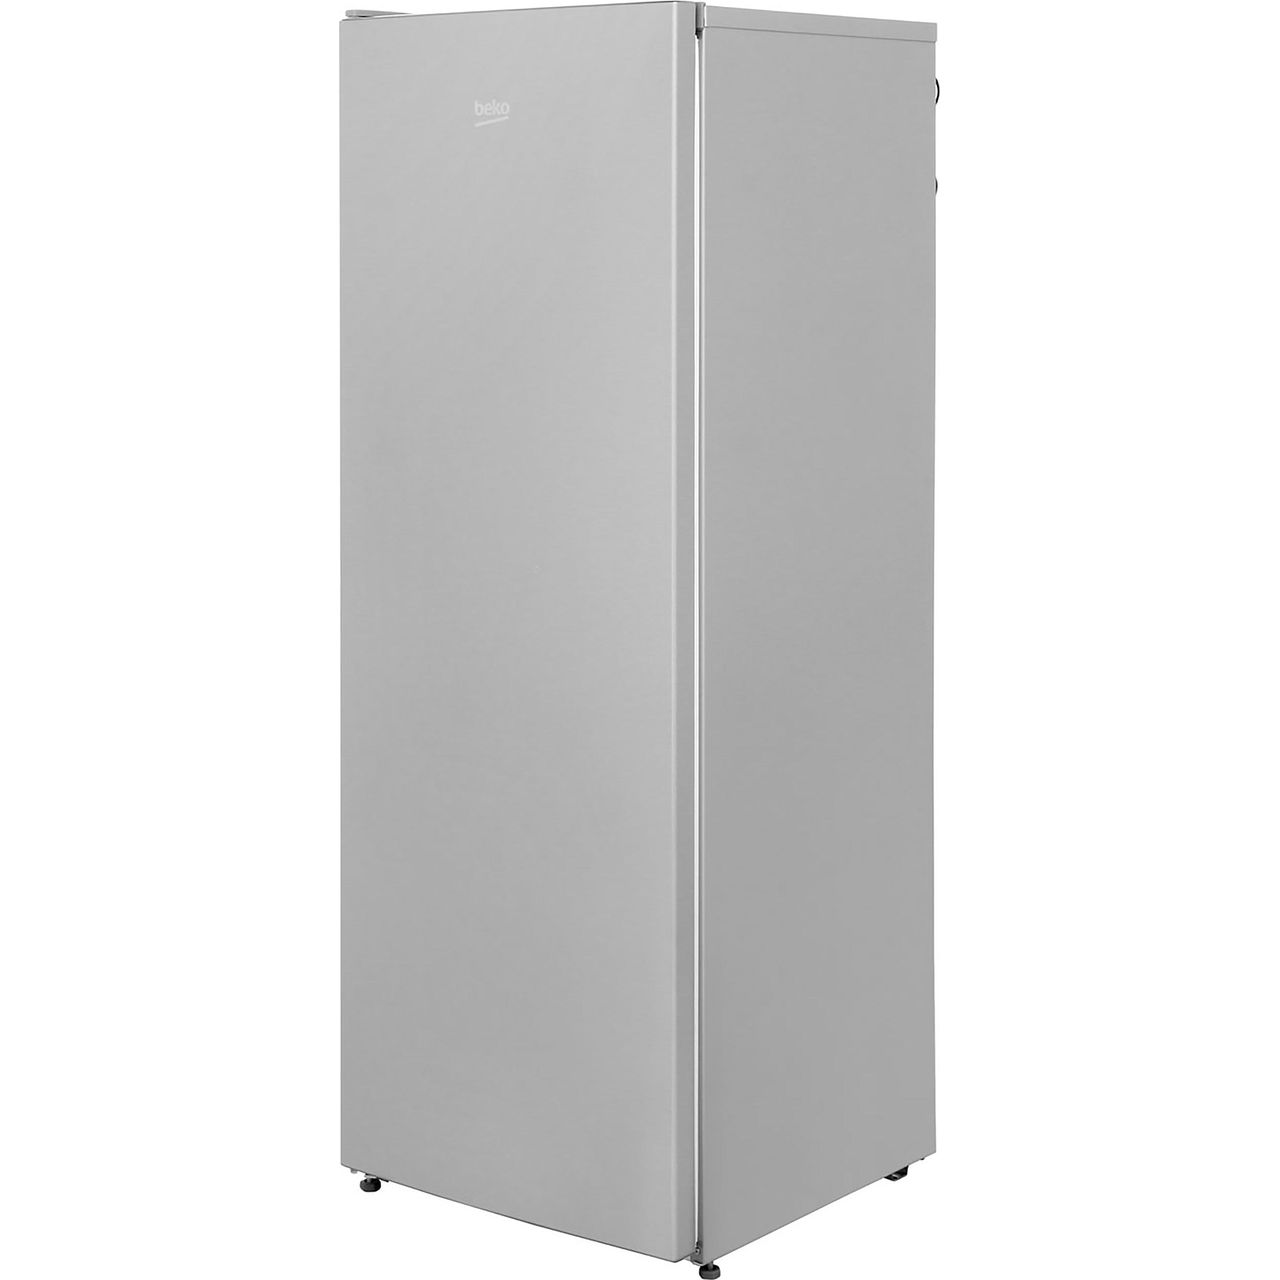 Beko FFG1545S Frost Free Upright Freezer Review